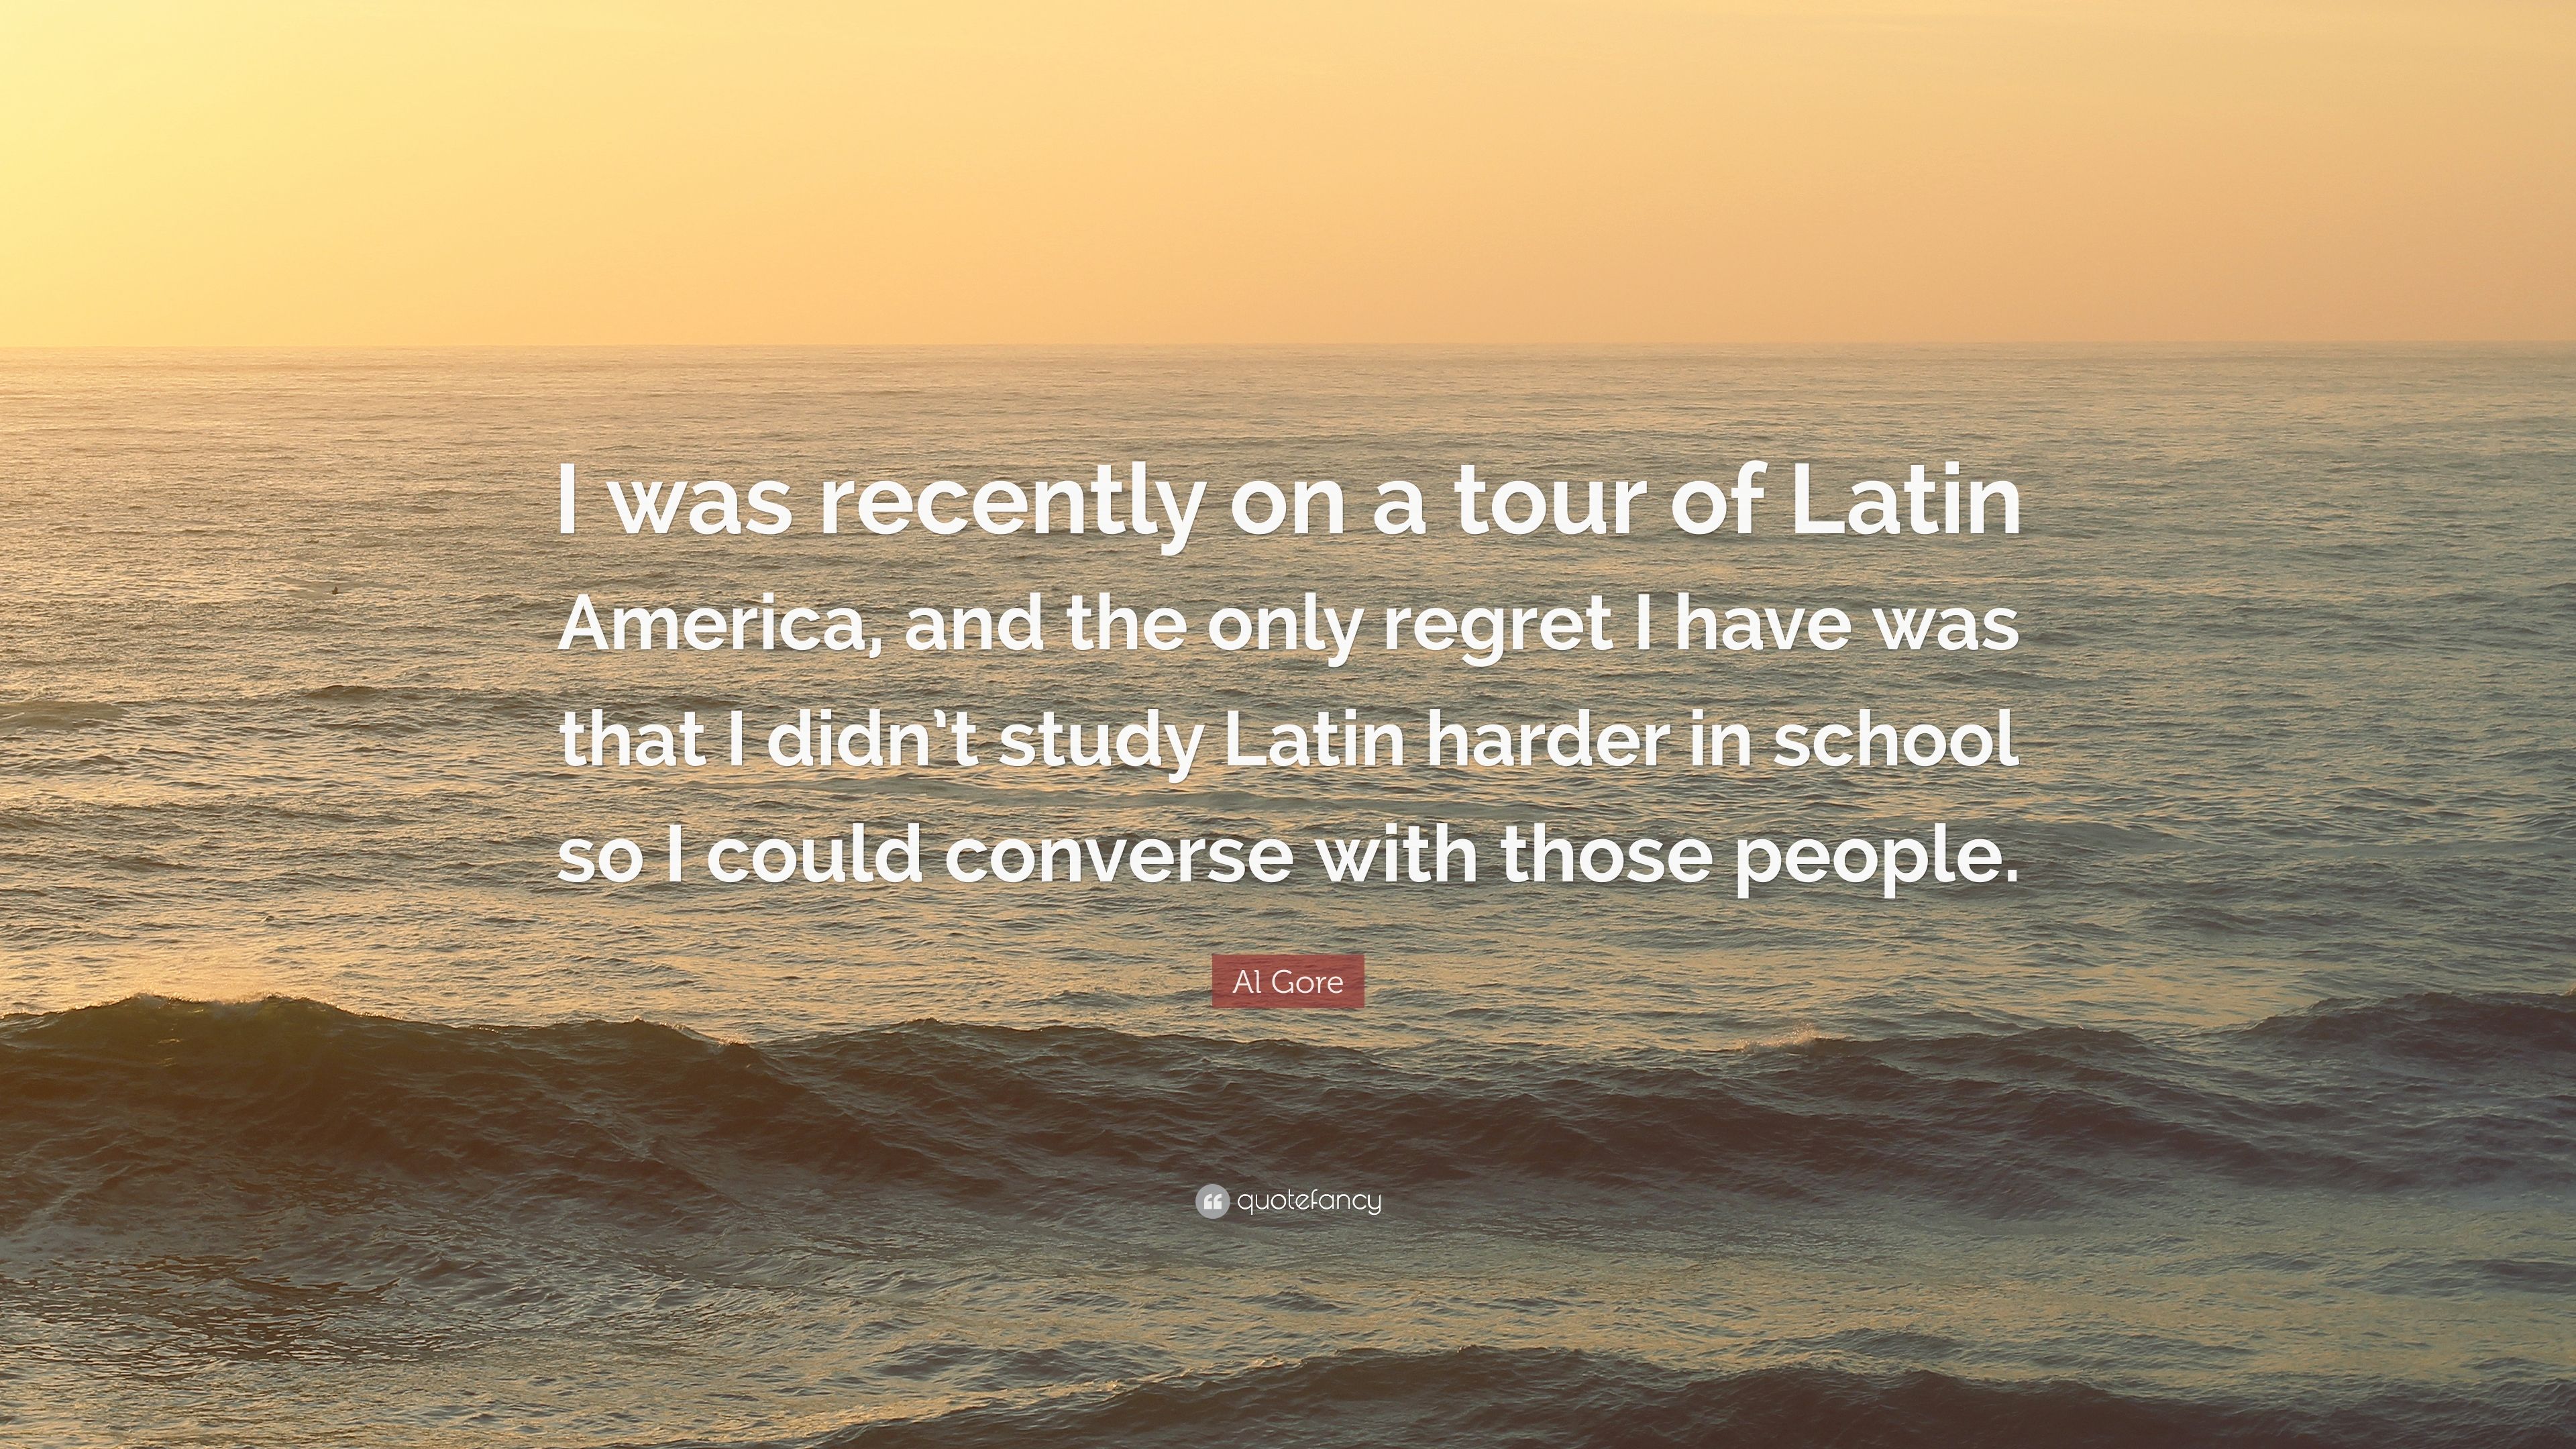 Al Gore Quote: “I was recently on a tour of Latin America, and